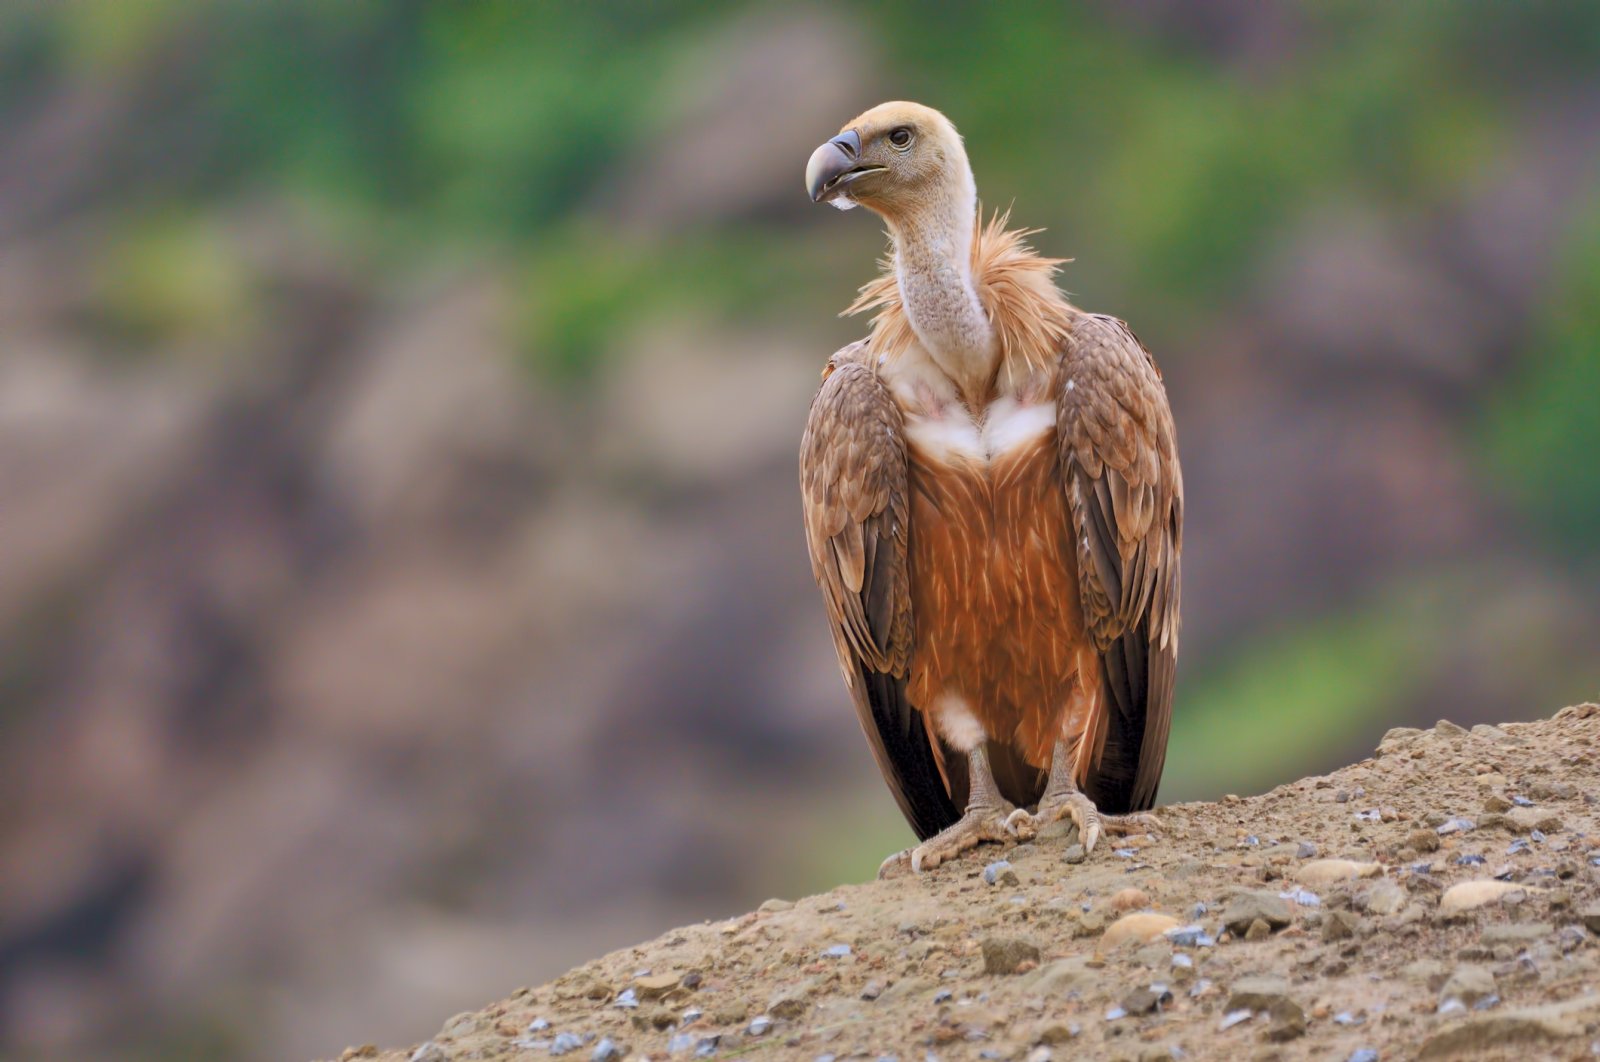 Despite being locally endangered, griffon vultures are gradually reestablishing a presence in southeastern Turkey. (iStock Photo)